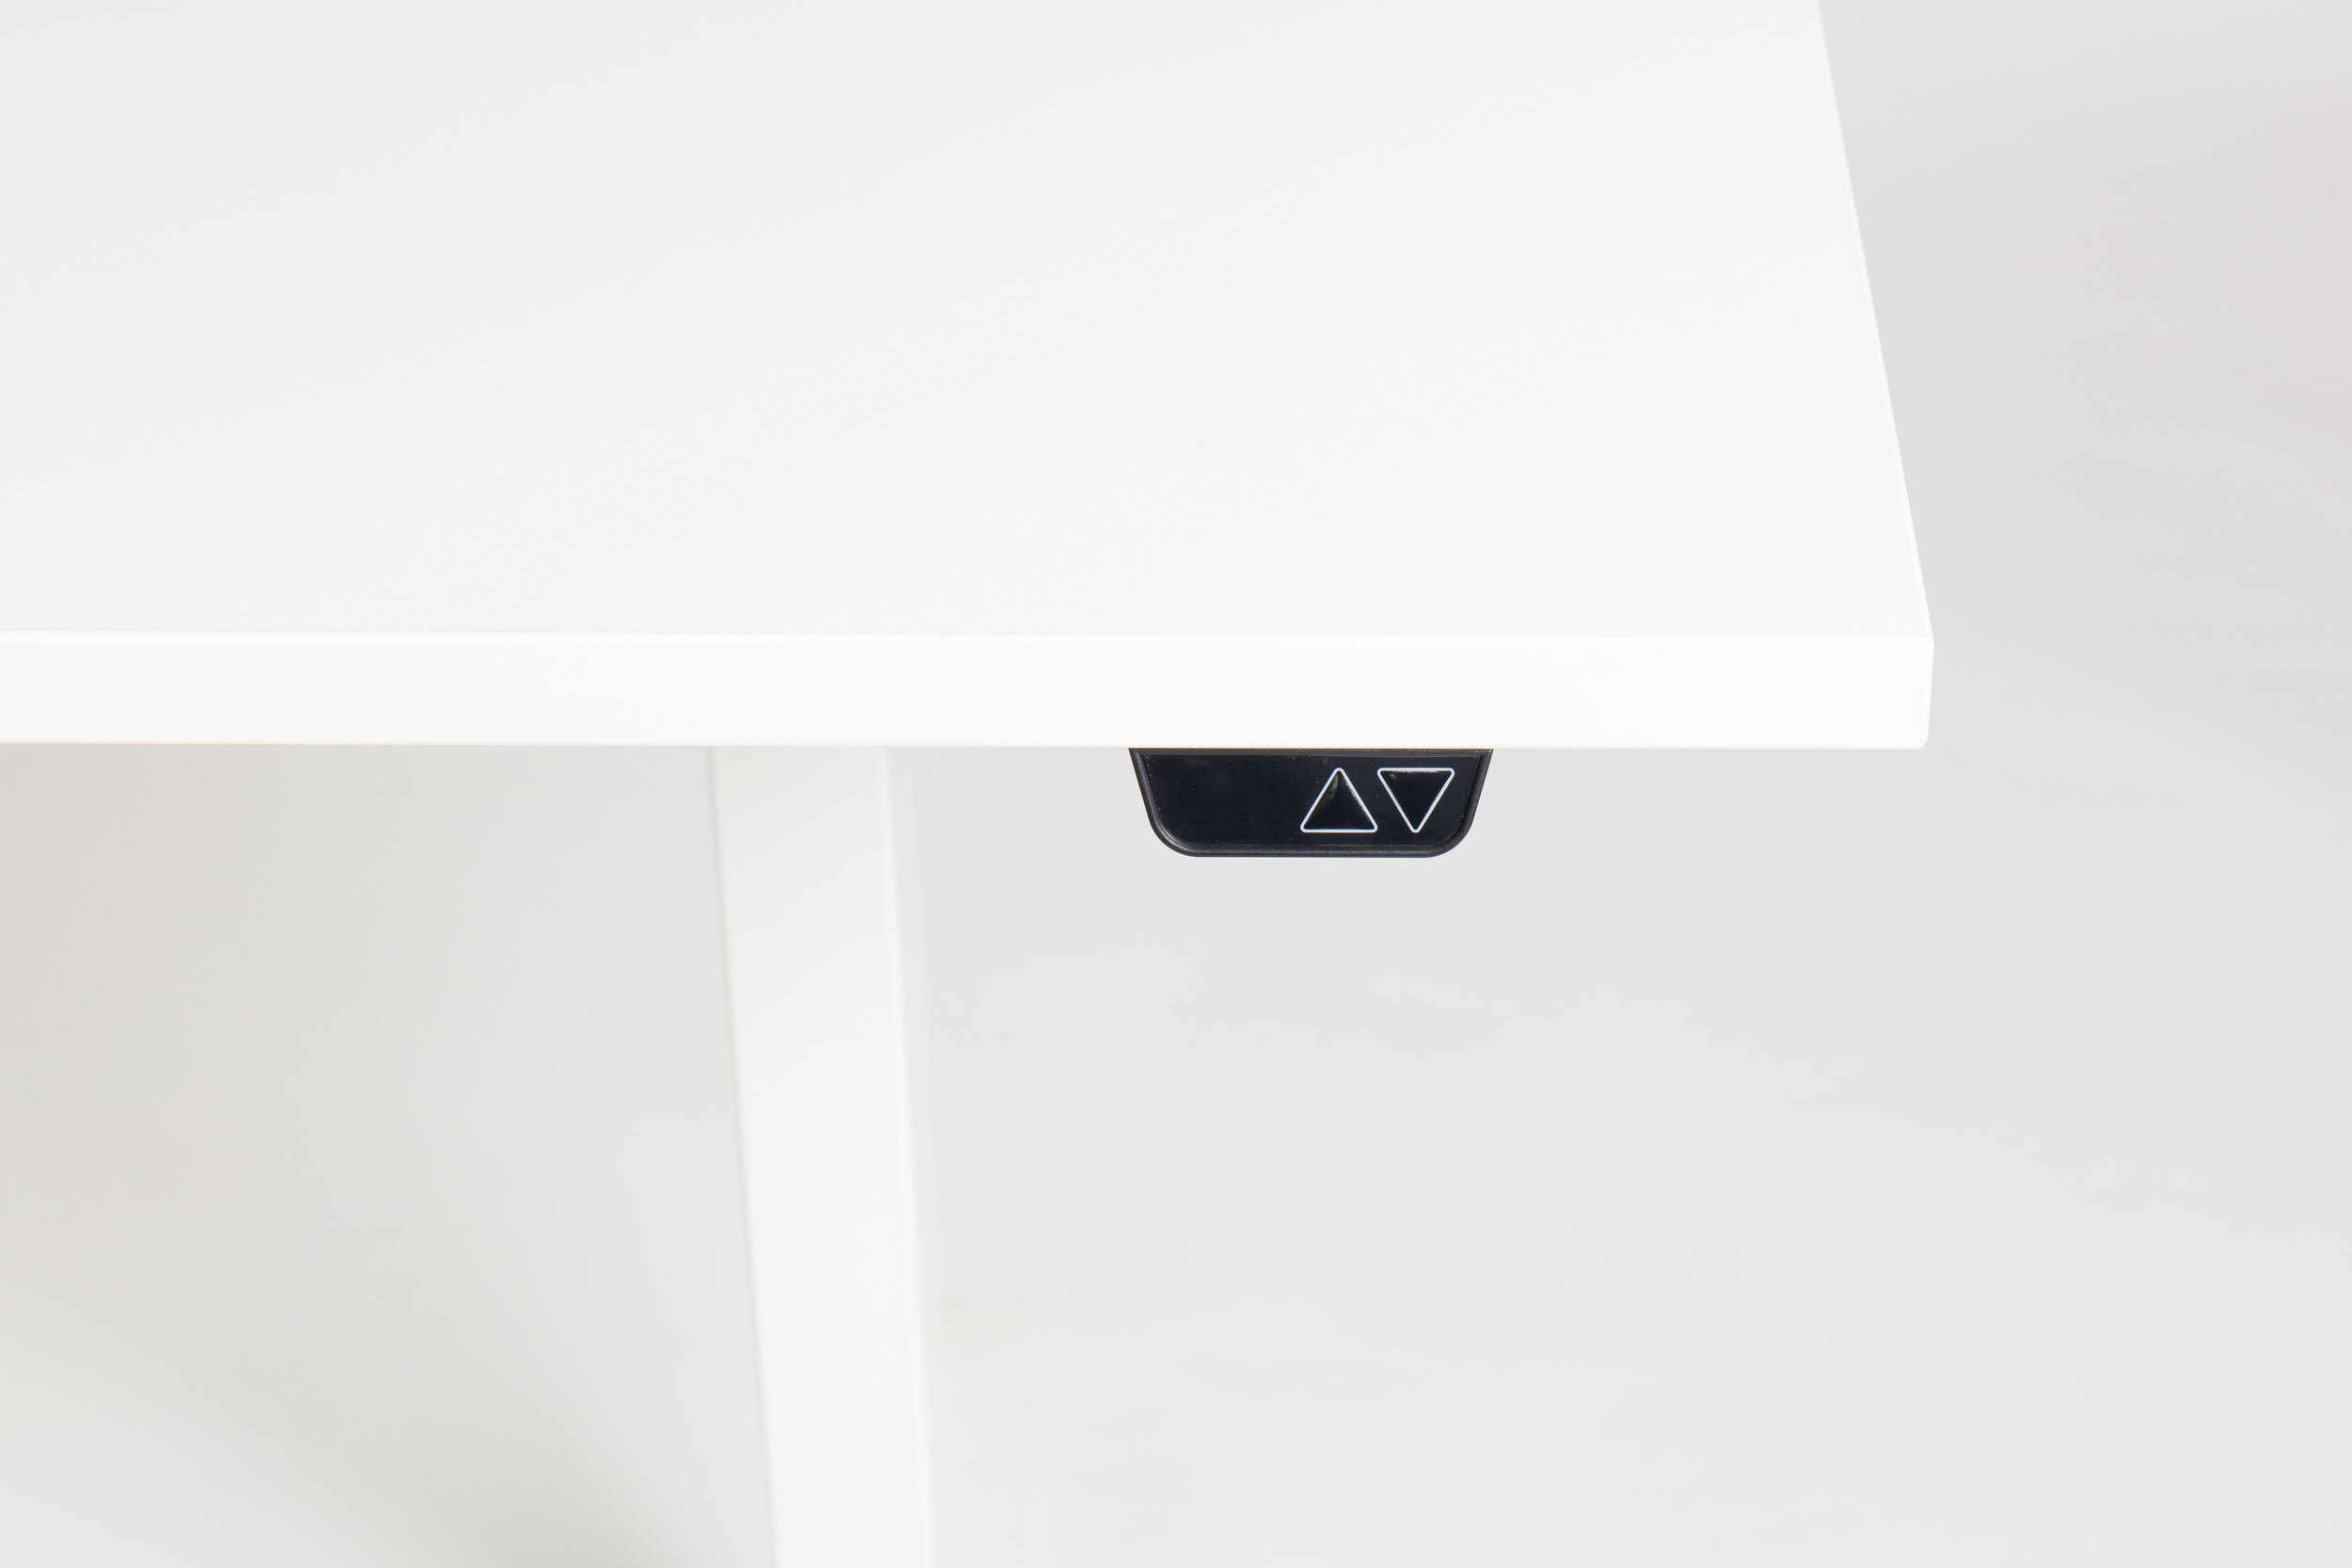 Height adjustable desk delivered anywhere in Ireland — McCreery